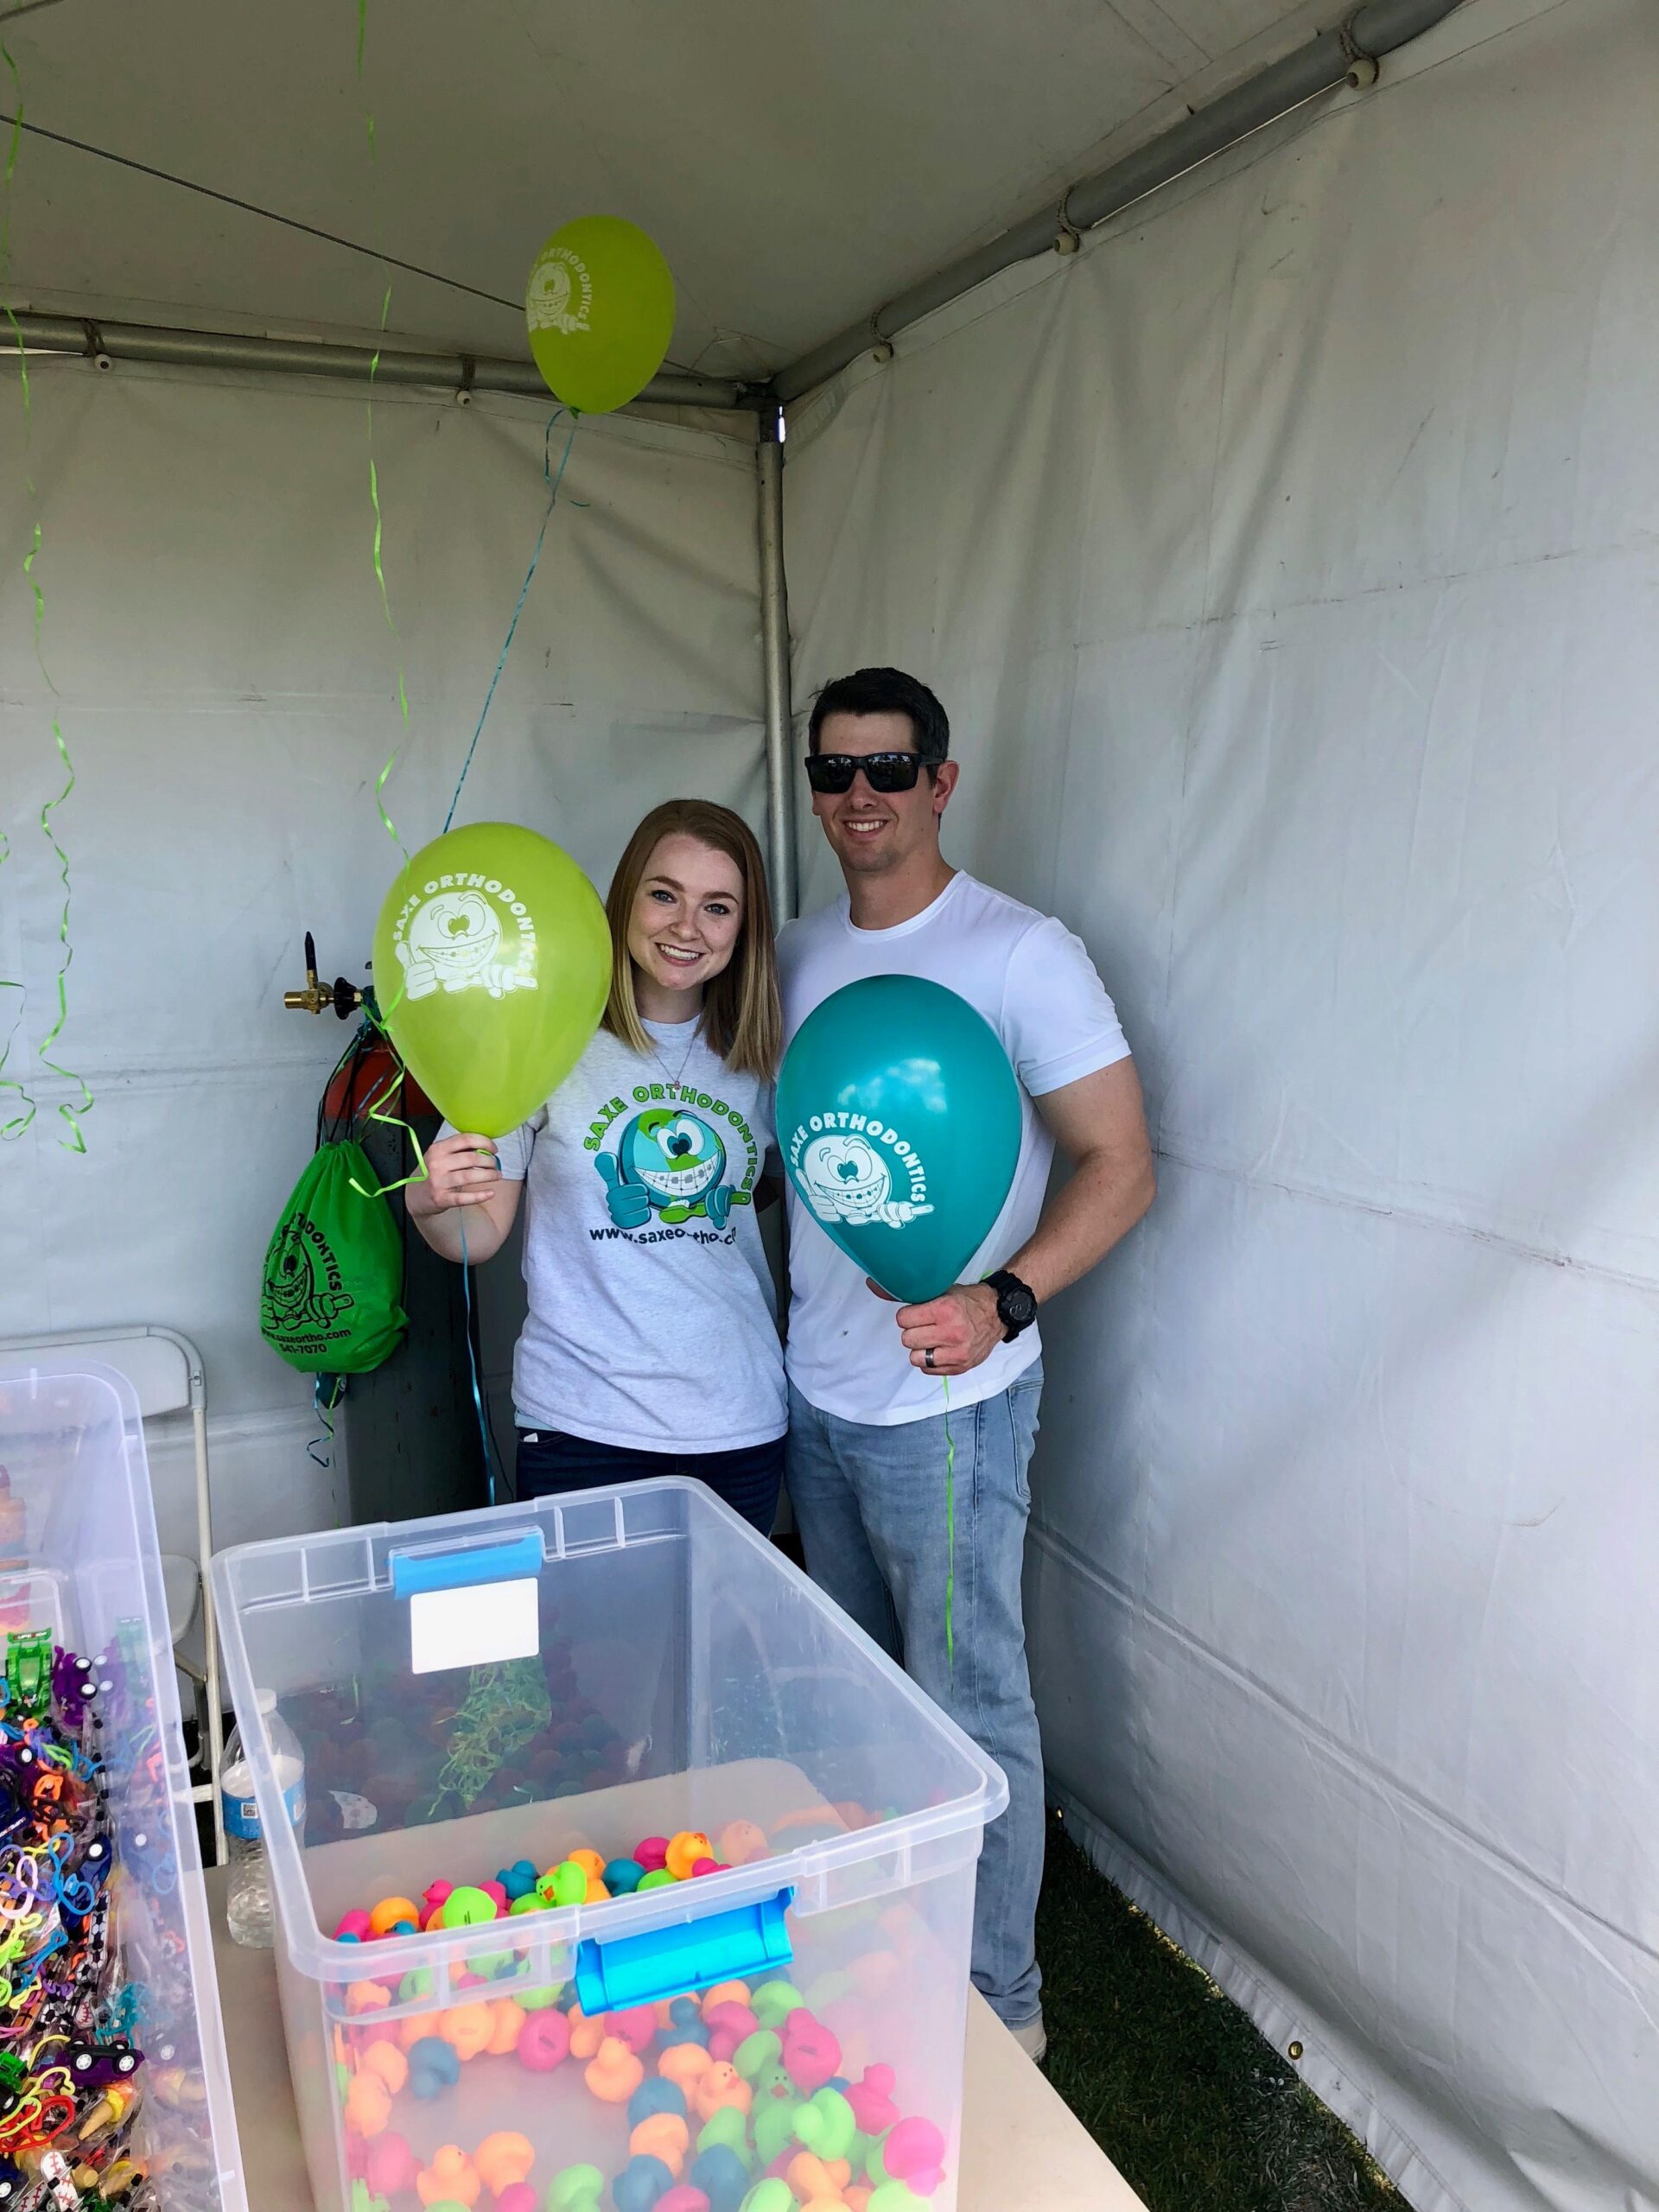 A couple posing for an event holding three balloons with the logo of Saxe Orthodontics.